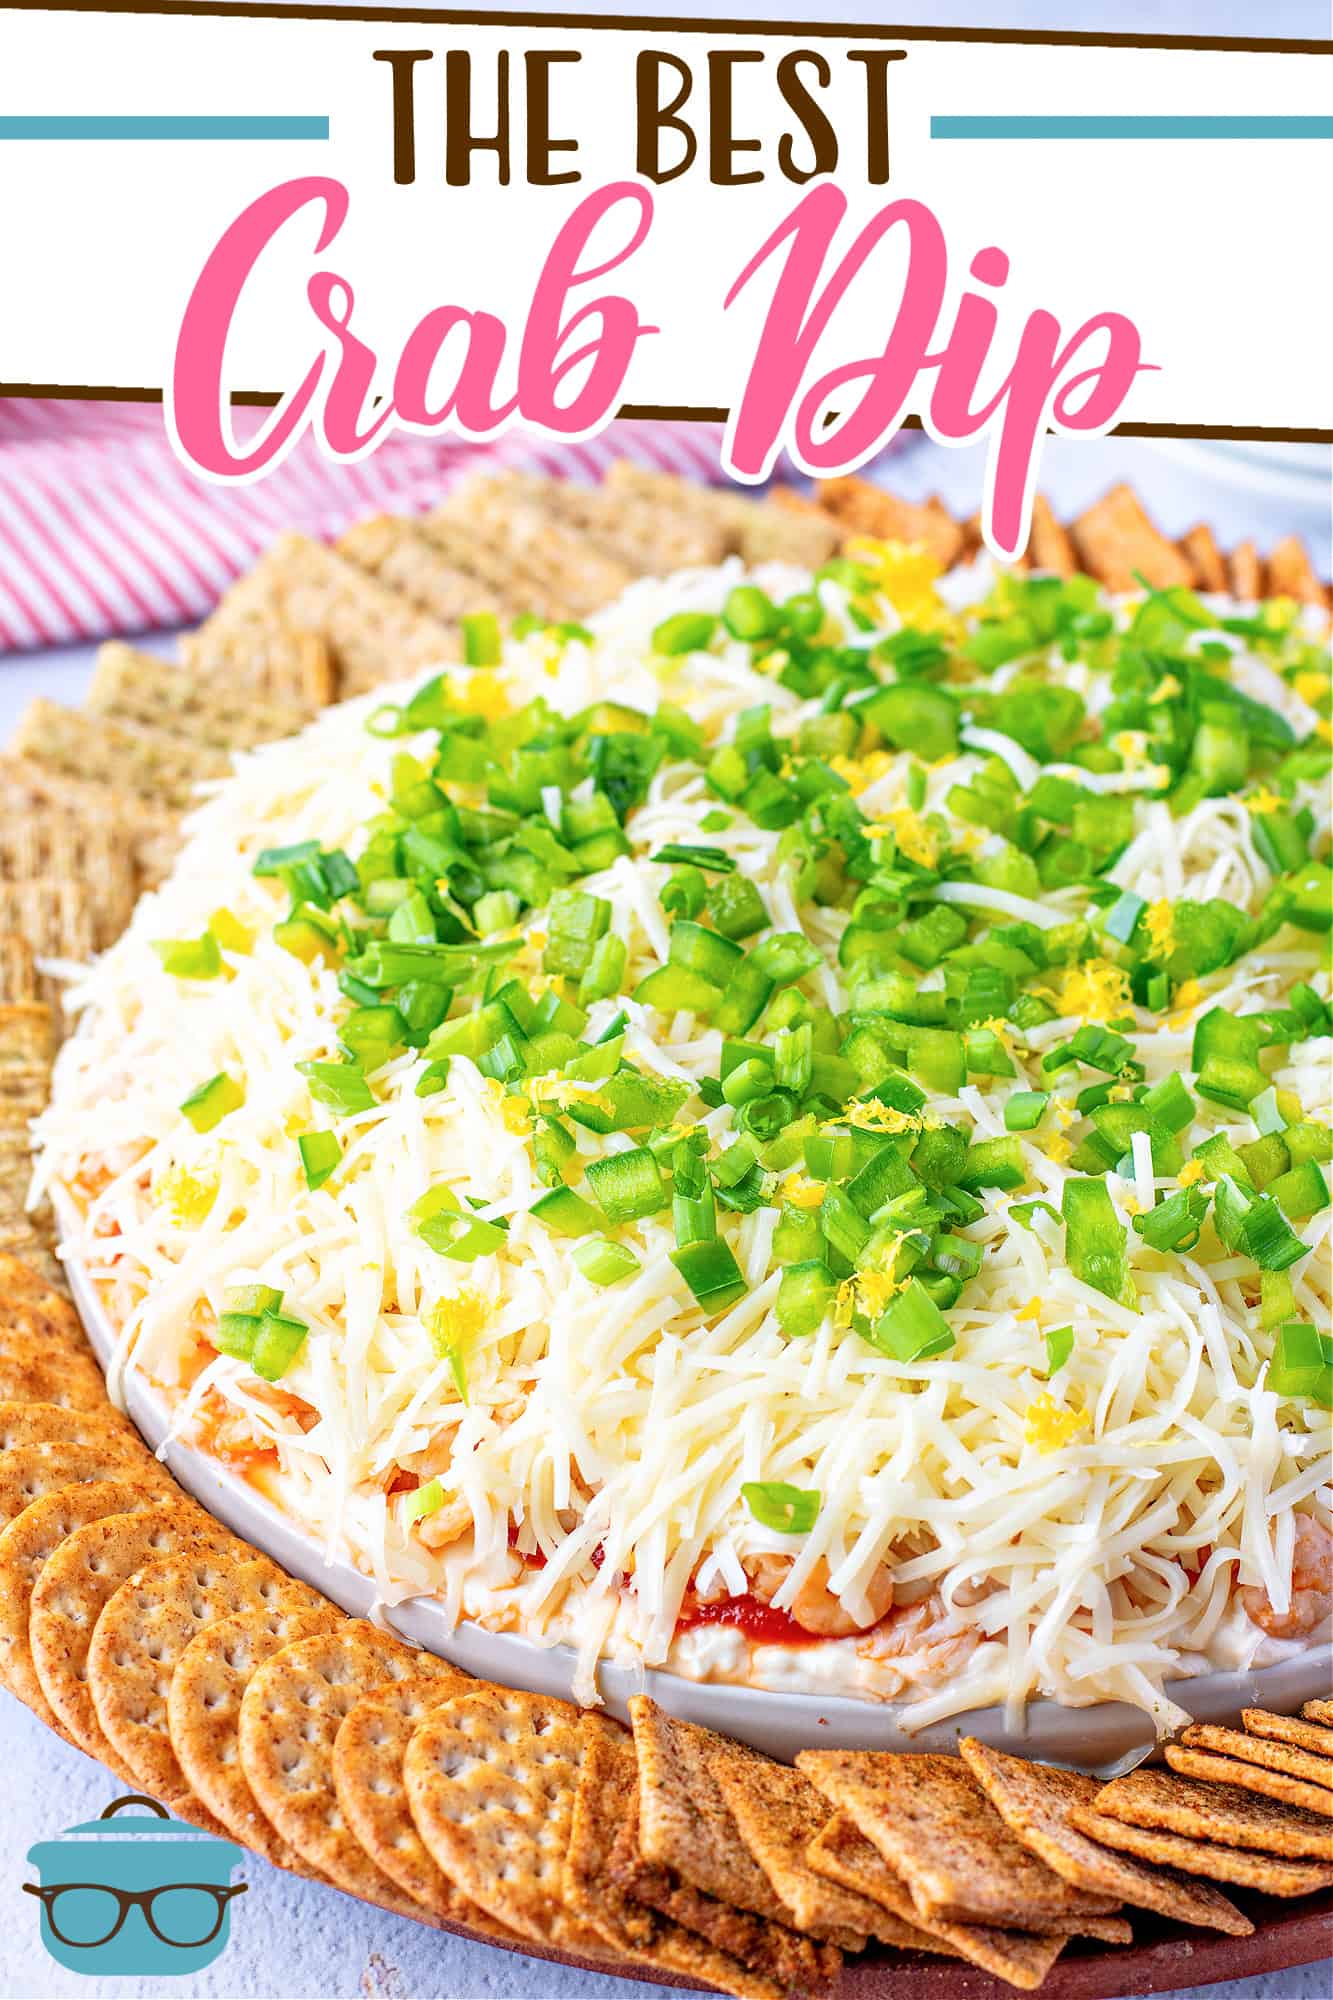 The Best Crab Dip recipe from The Country Cook, dip shown on a round white platter, topped with sliced green onions with crackers arranged in a circle around the dip.